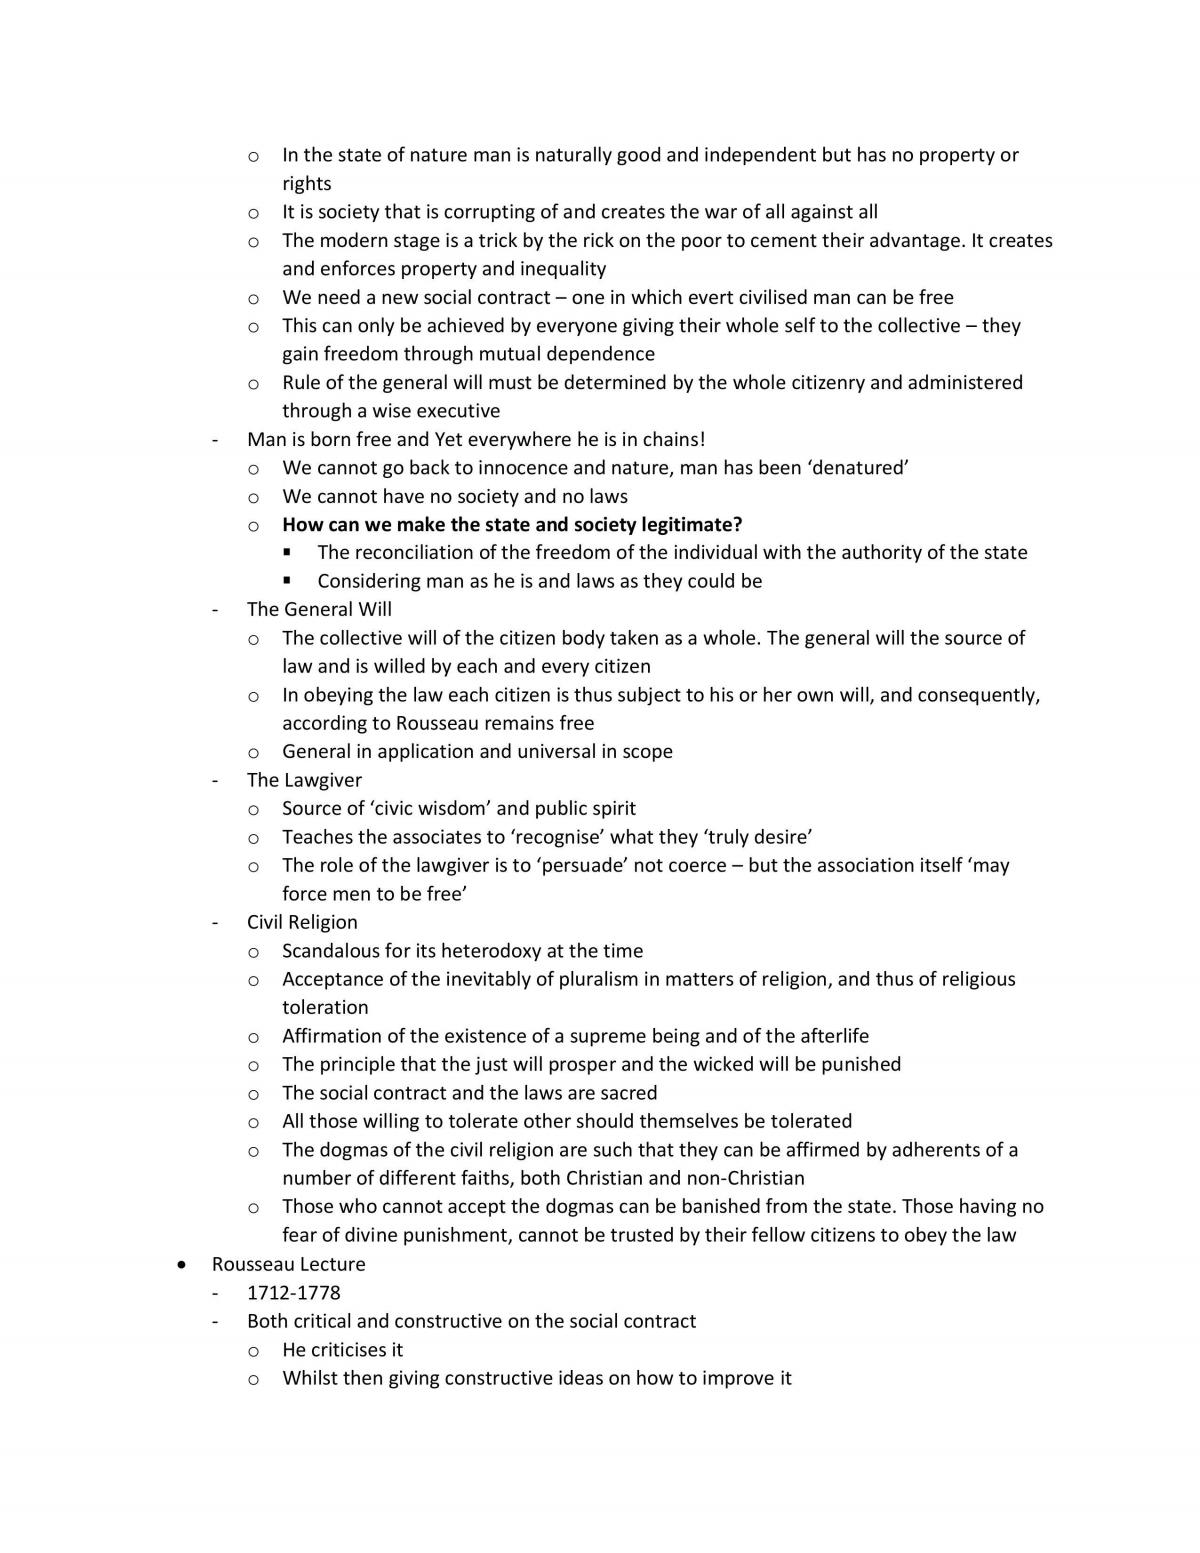 Foundations of Western Political Thought Revision Notes - Page 2